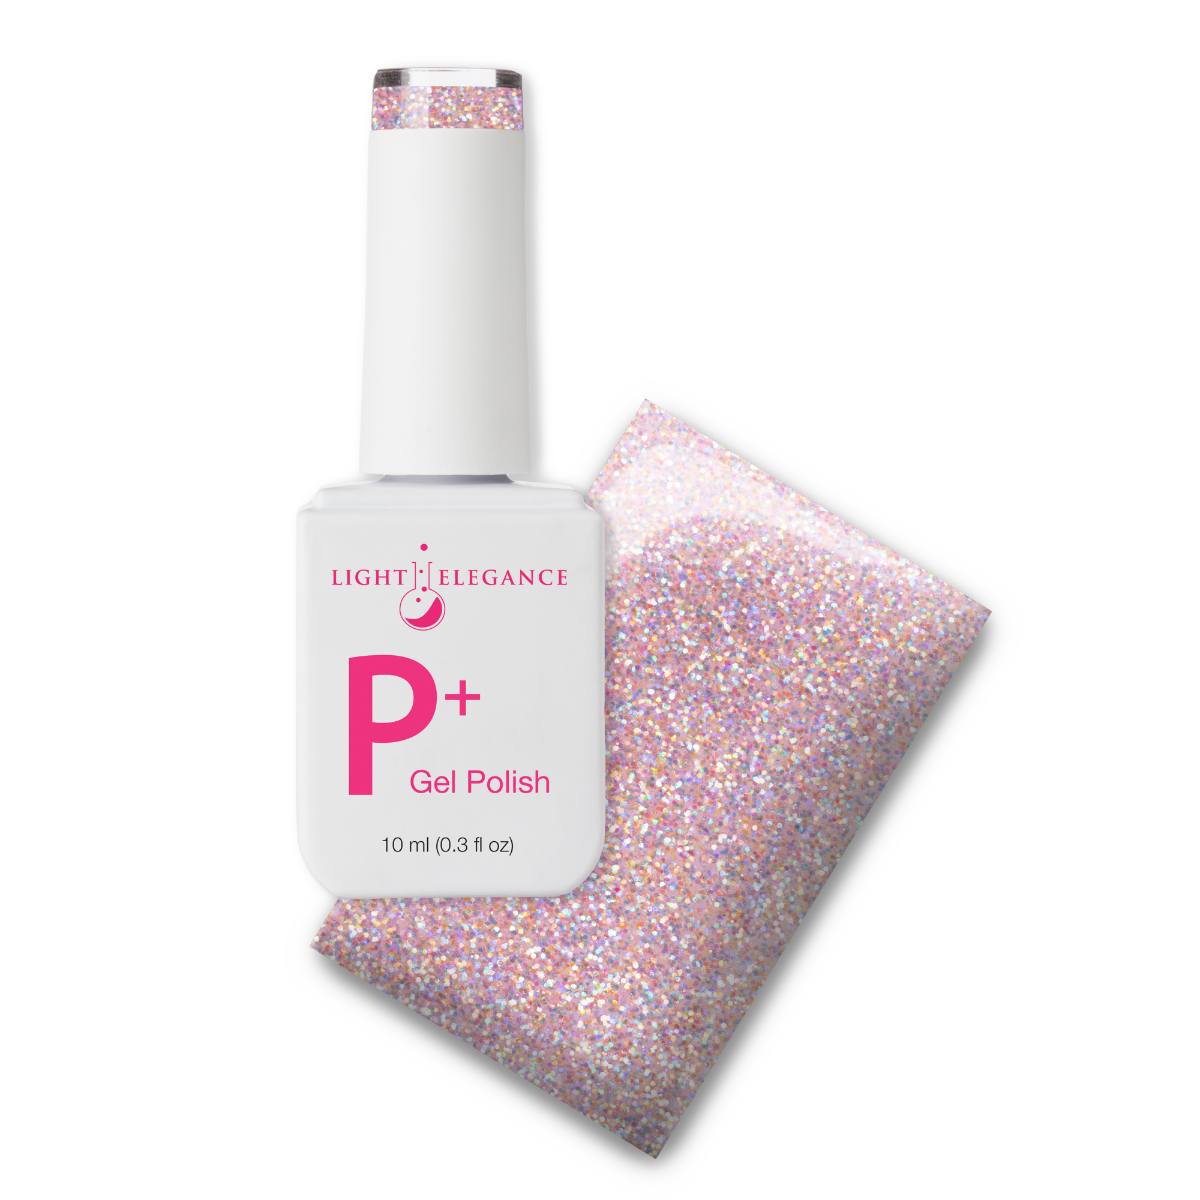 Light Elegance P+ Soak Off Glitter Gel - Over the Moon :: New Packaging - Creata Beauty - Professional Beauty Products